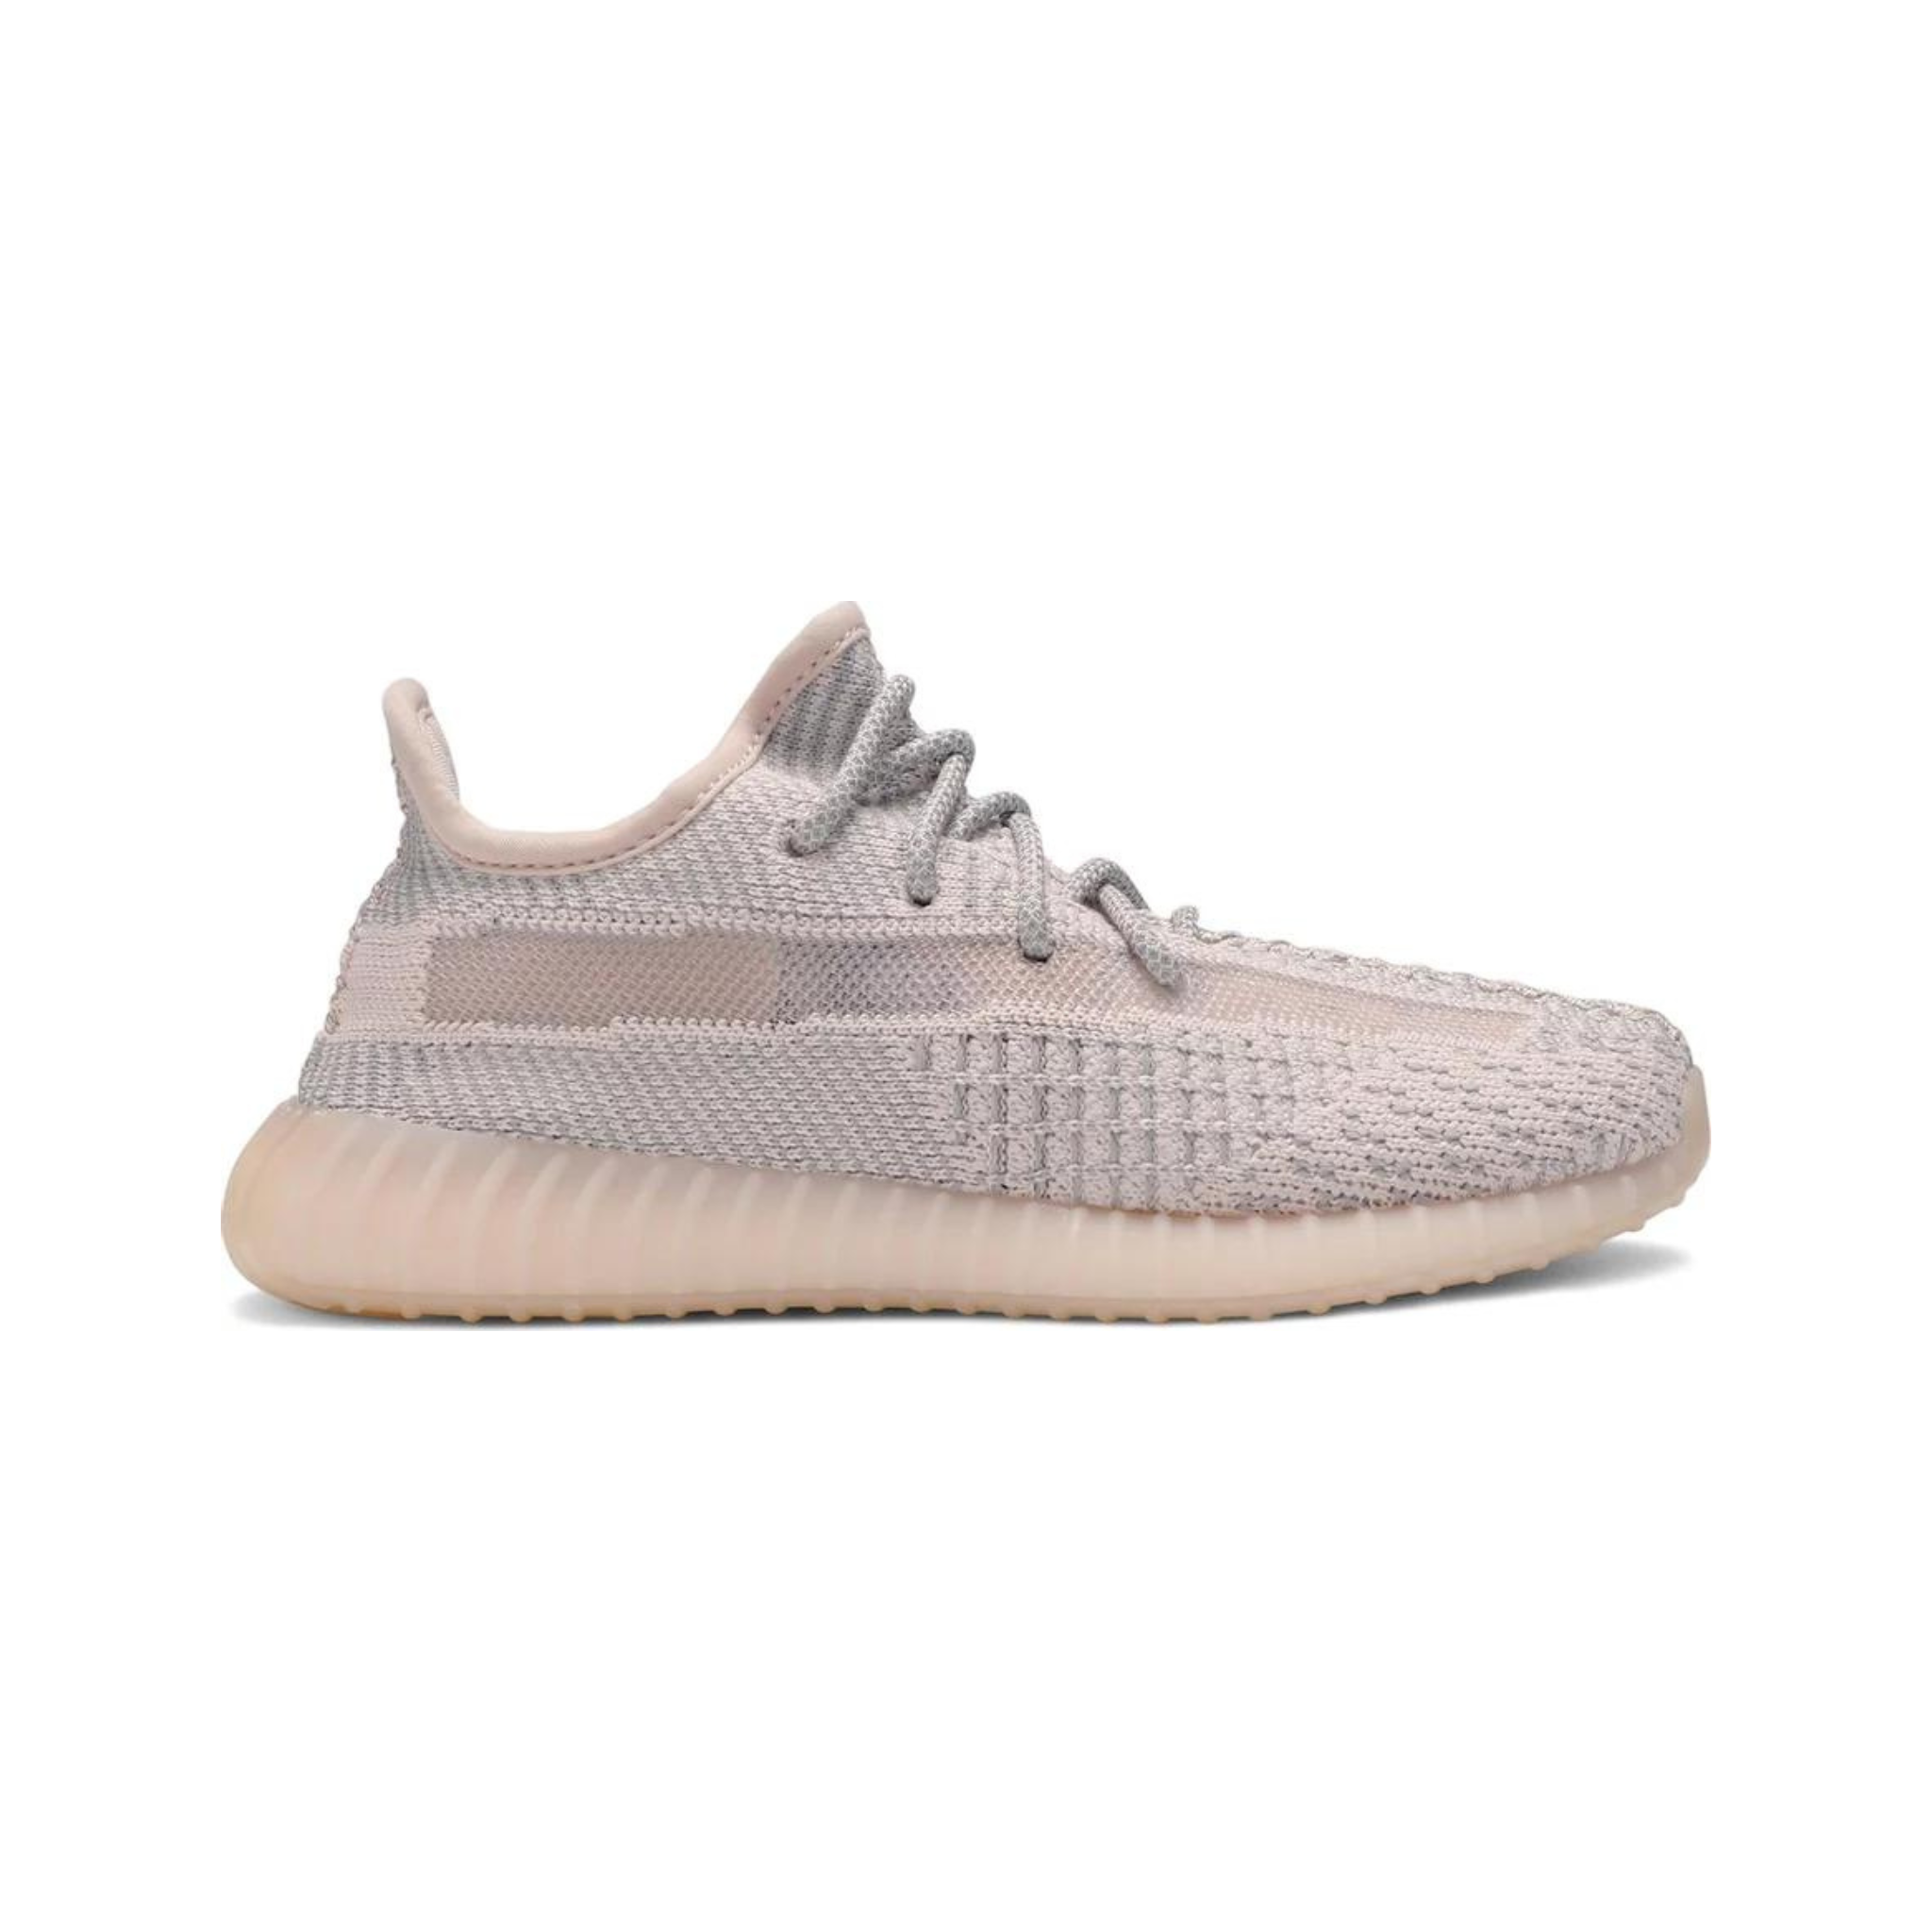 Adidas Yeezy Boost 350 V2 Synth (Non-Reflective)